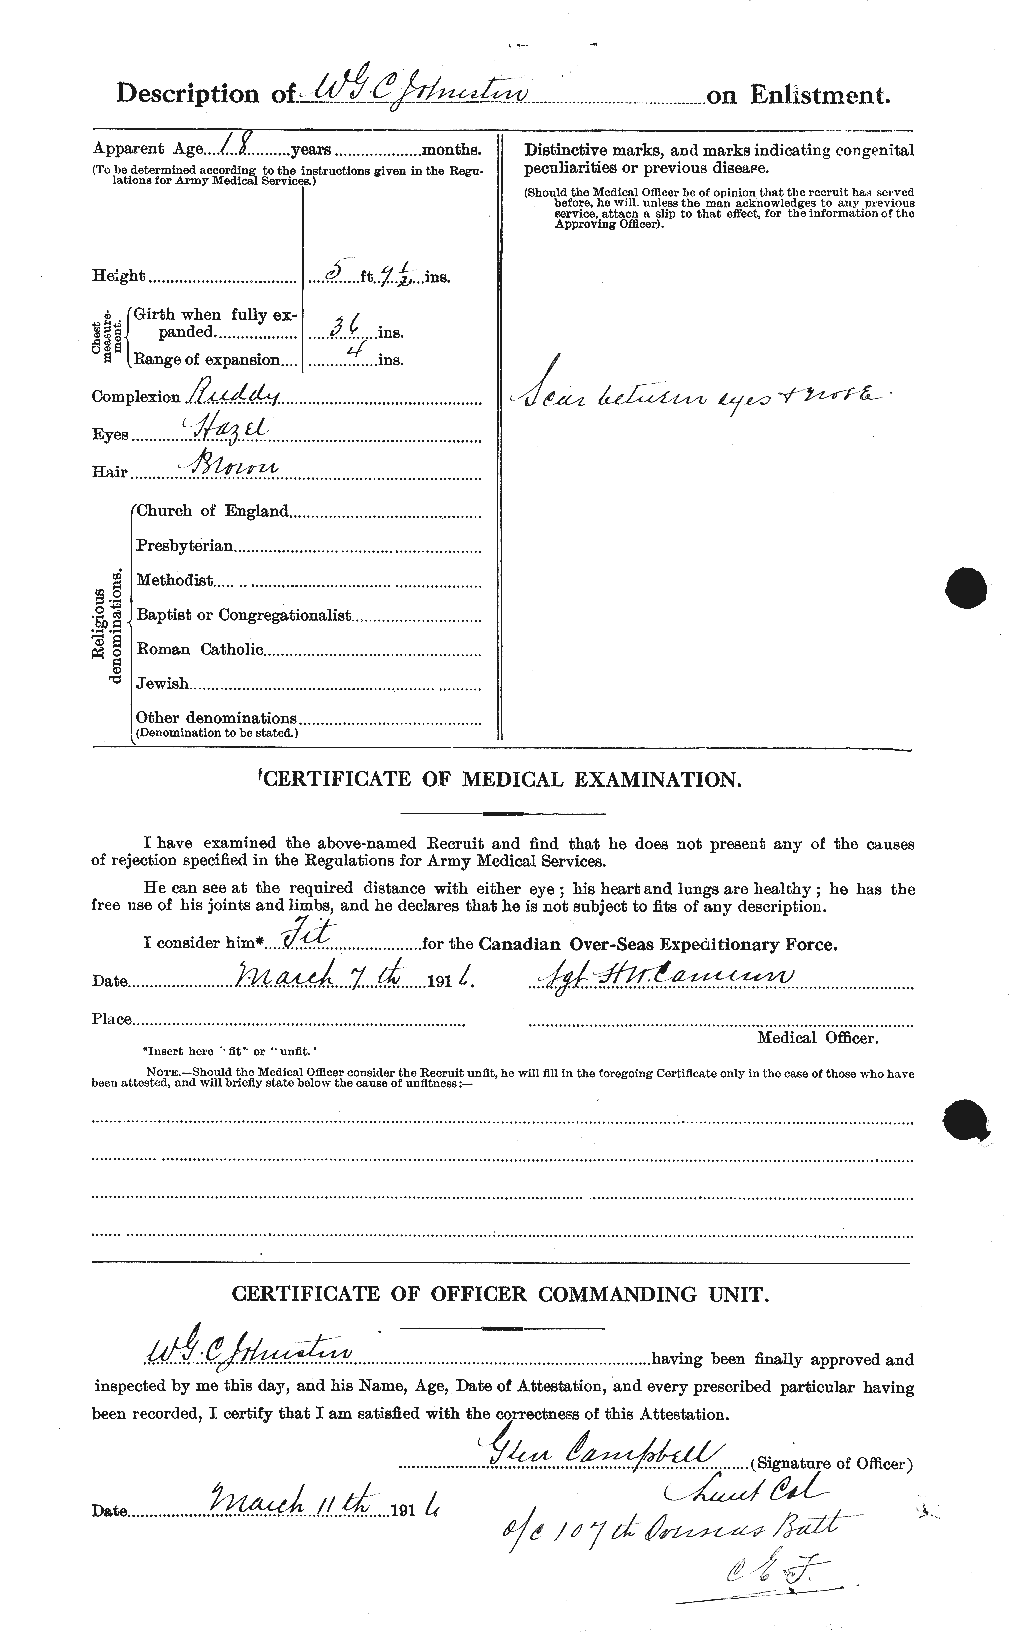 Personnel Records of the First World War - CEF 427204b